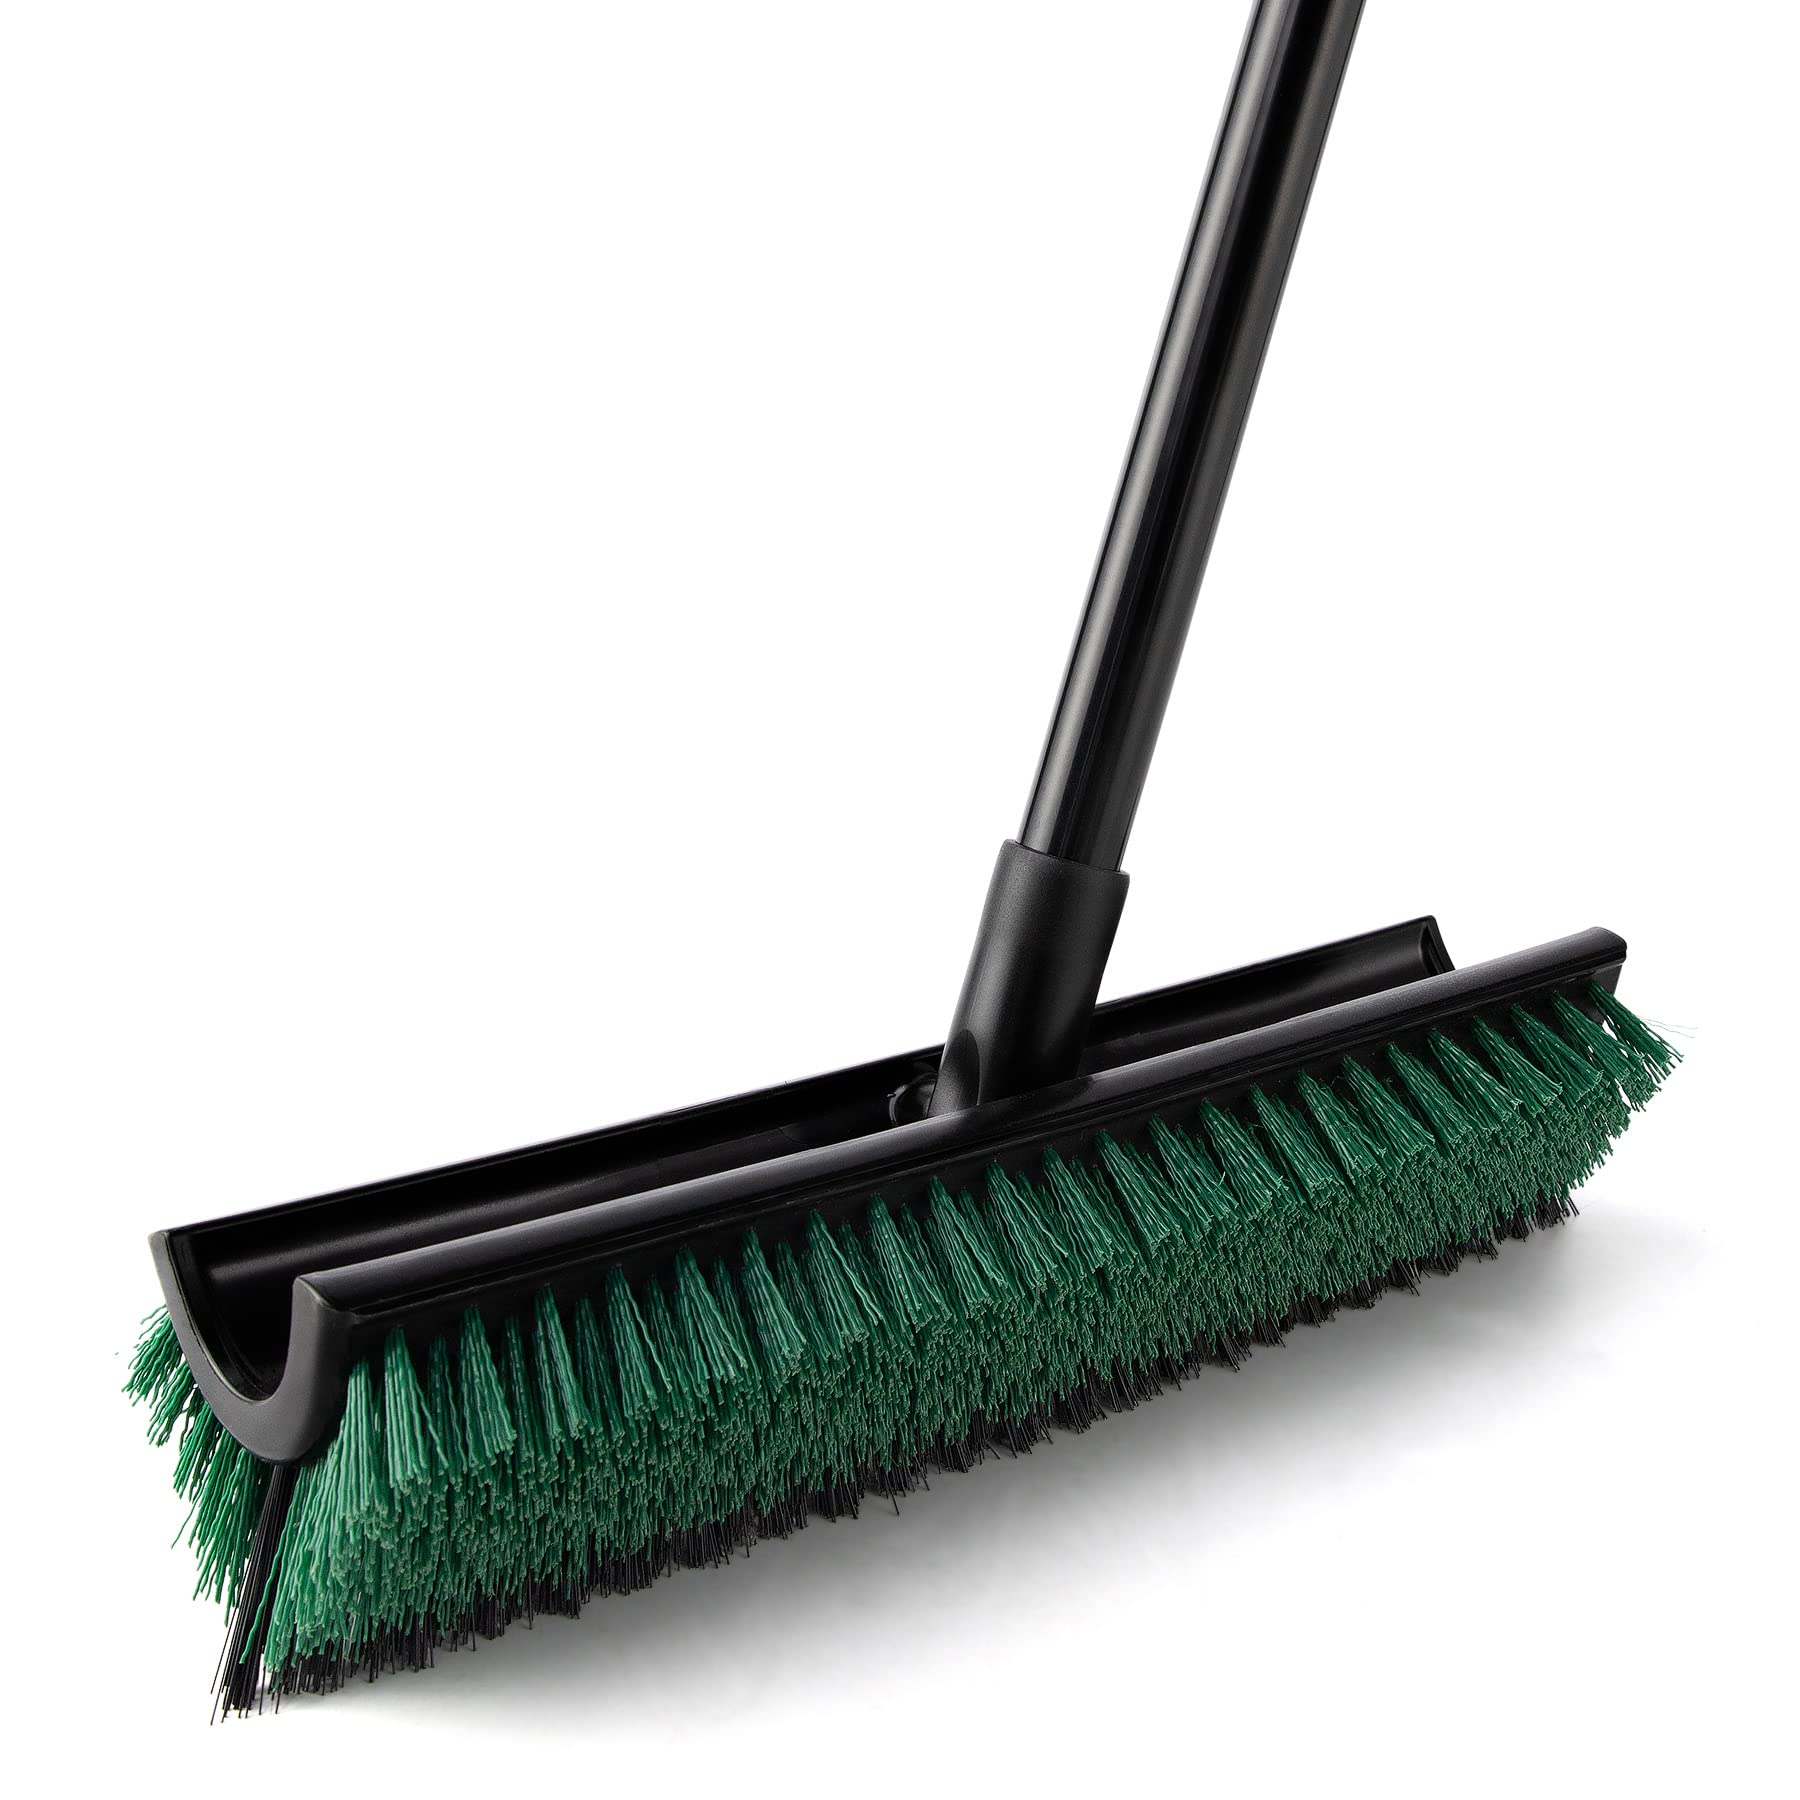 Eyliden 65.5 Long Handle Double-Sided Floor Scrub Brush Triangle Brush -  Professional Outdoor Corner Crevice Cleaning with Stiff Bristles,Applicable